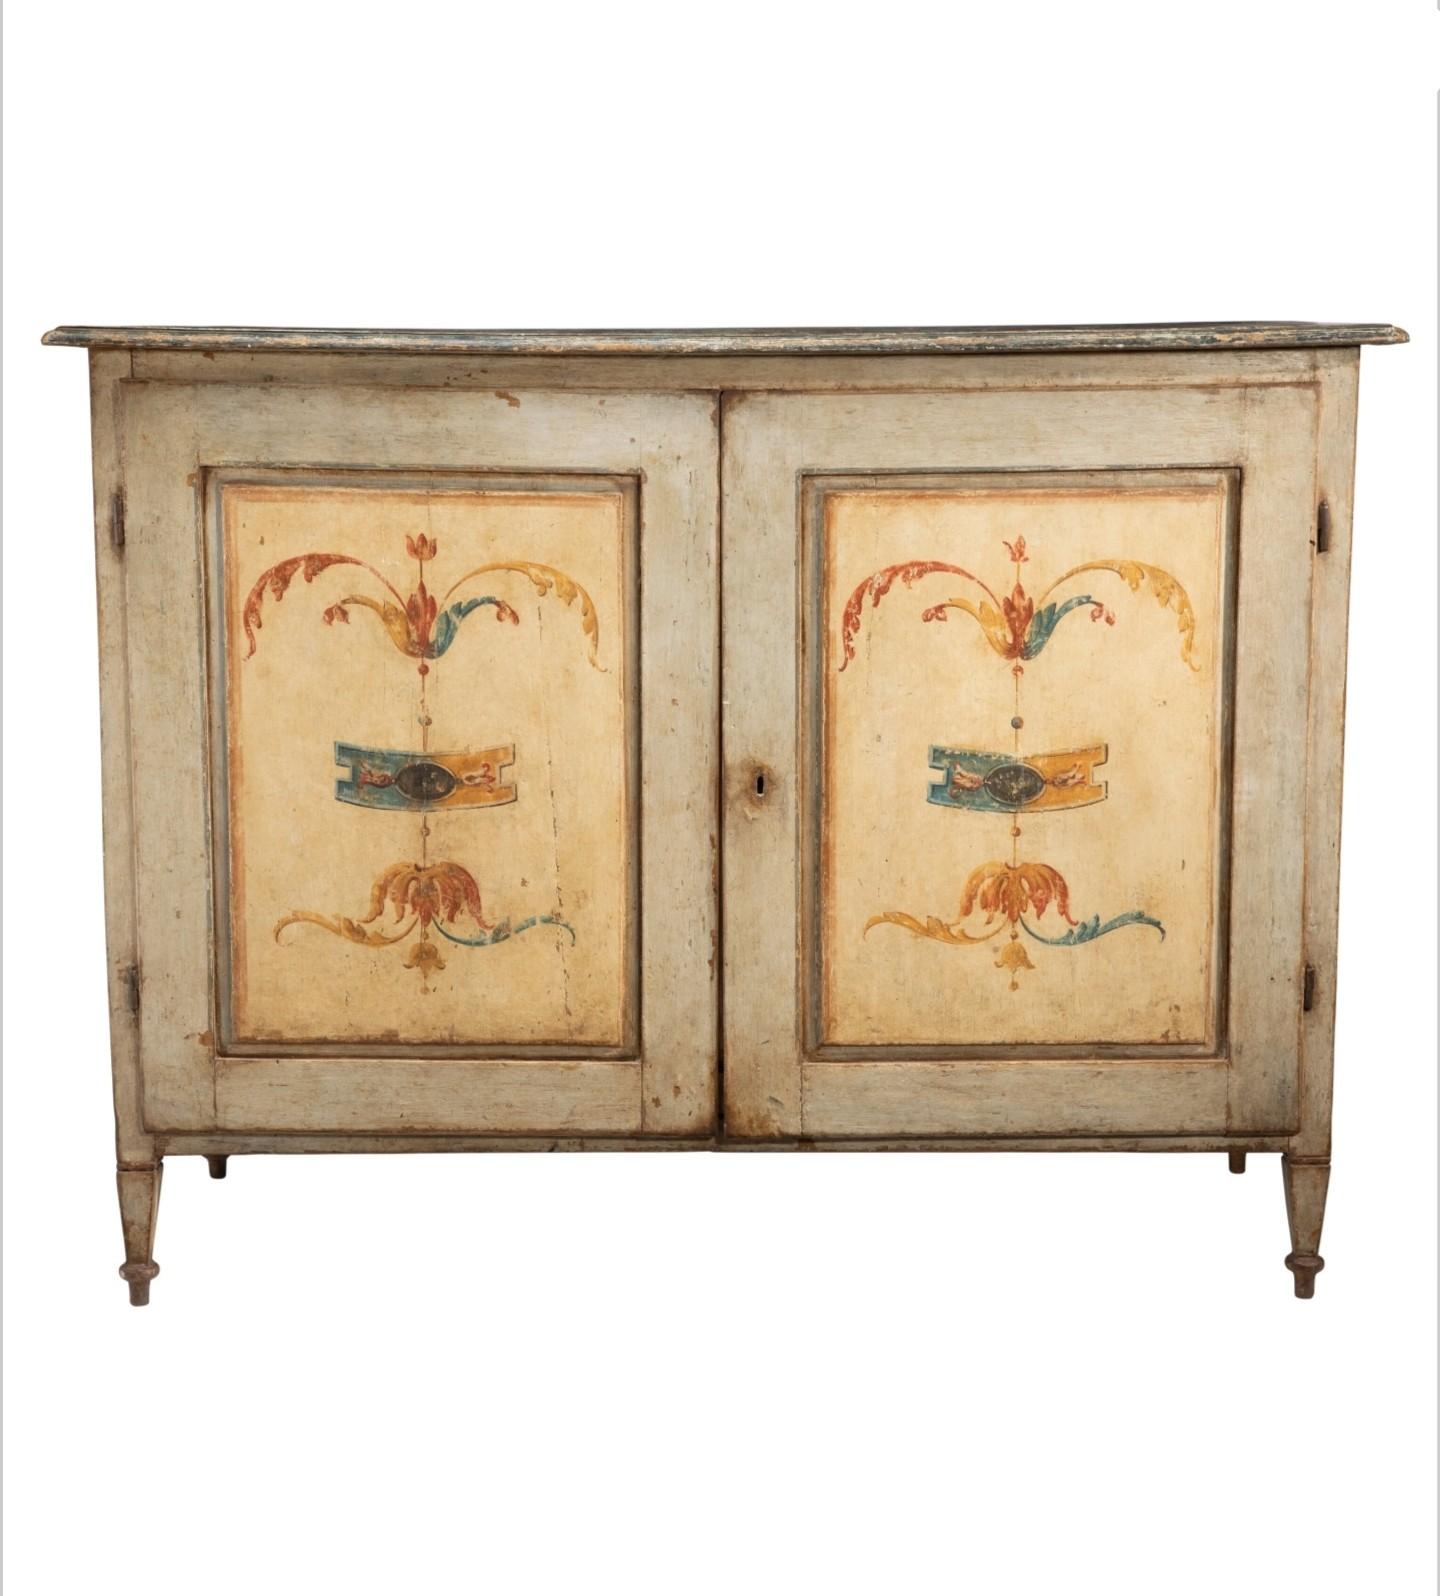 A stunning large antique Tuscan two-door cabinet (buffet - credenza) with Renaissance style polychromed decoration. circa 1850

Hand-crafted in the Provincial Tuscany region of central Italy in the mid-19th century, old solid wood construction, most